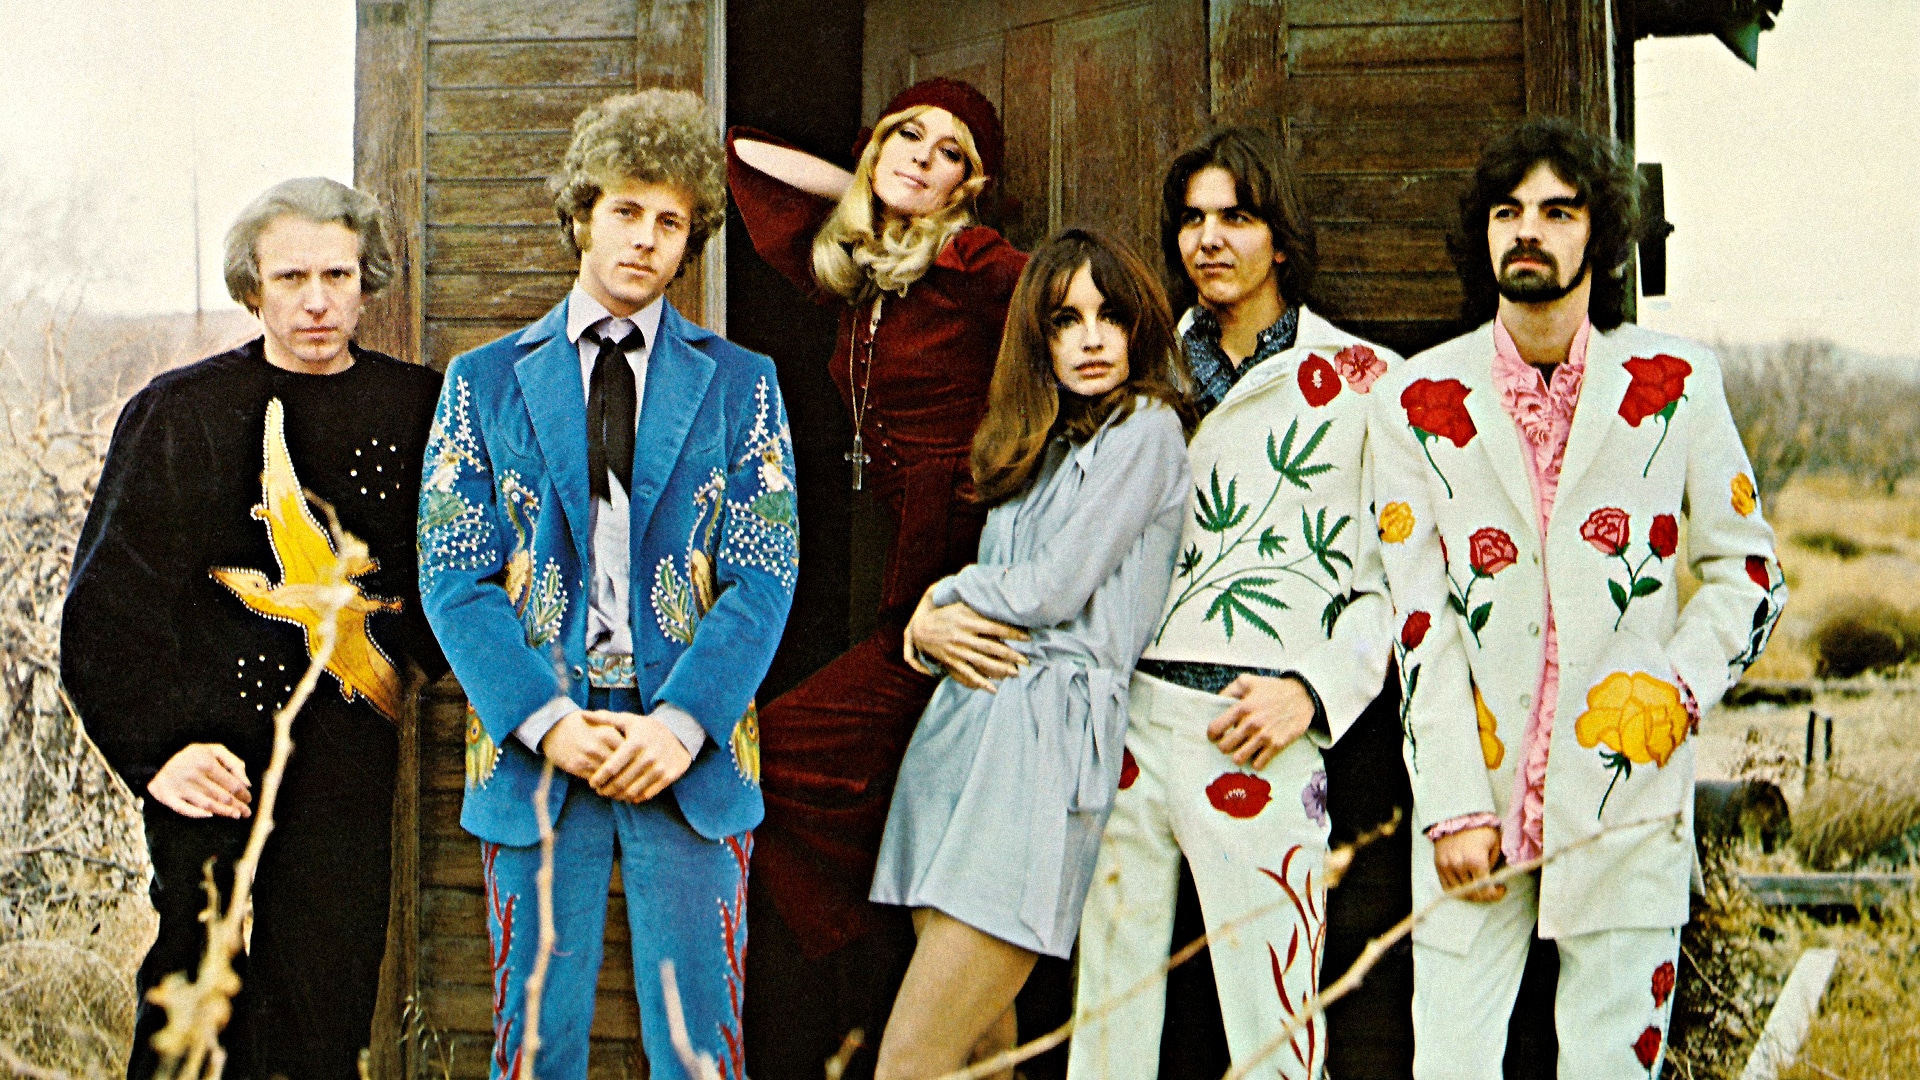 Your Angel Steps Out Of Heaven av The Flying Burrito Brothers